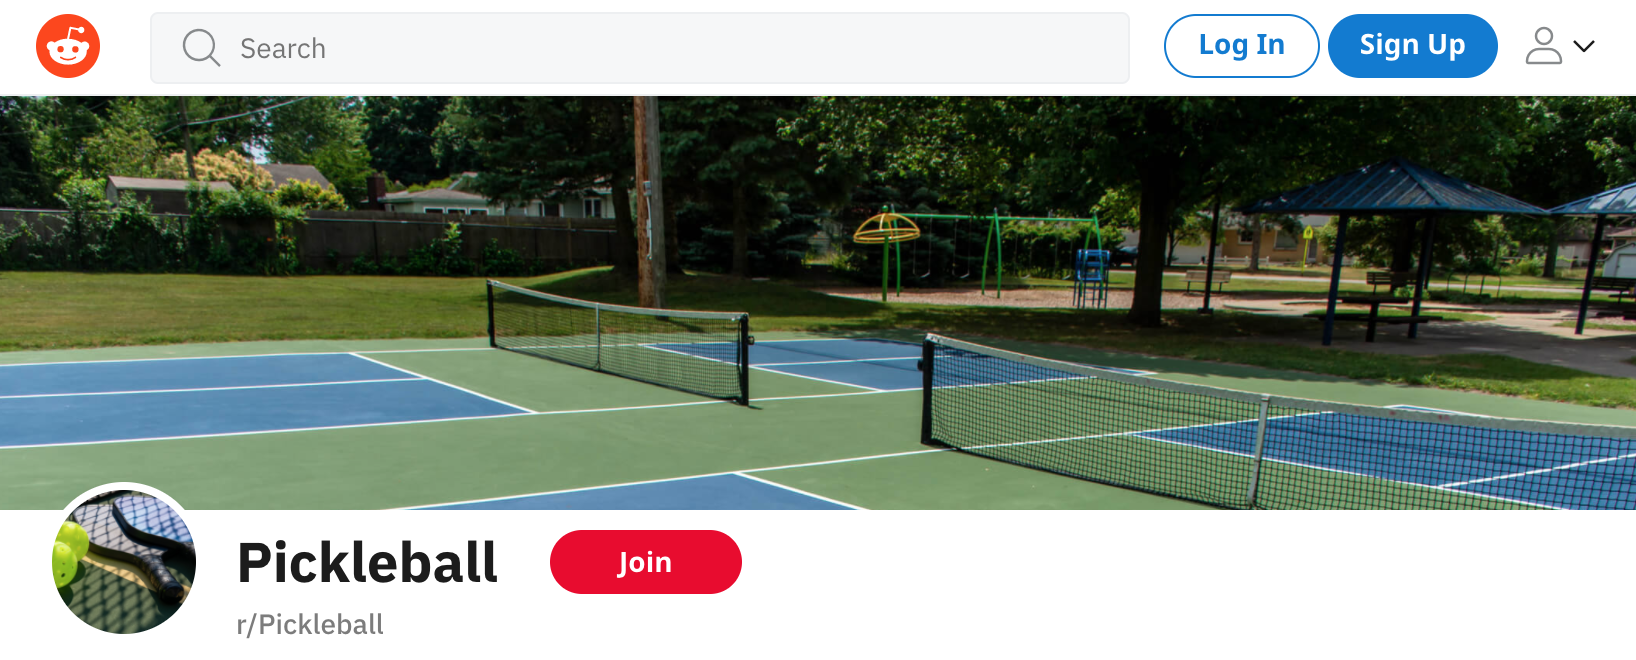 Some of the Best Websites for Pickleball You May Not be Visiting — Pickleball University